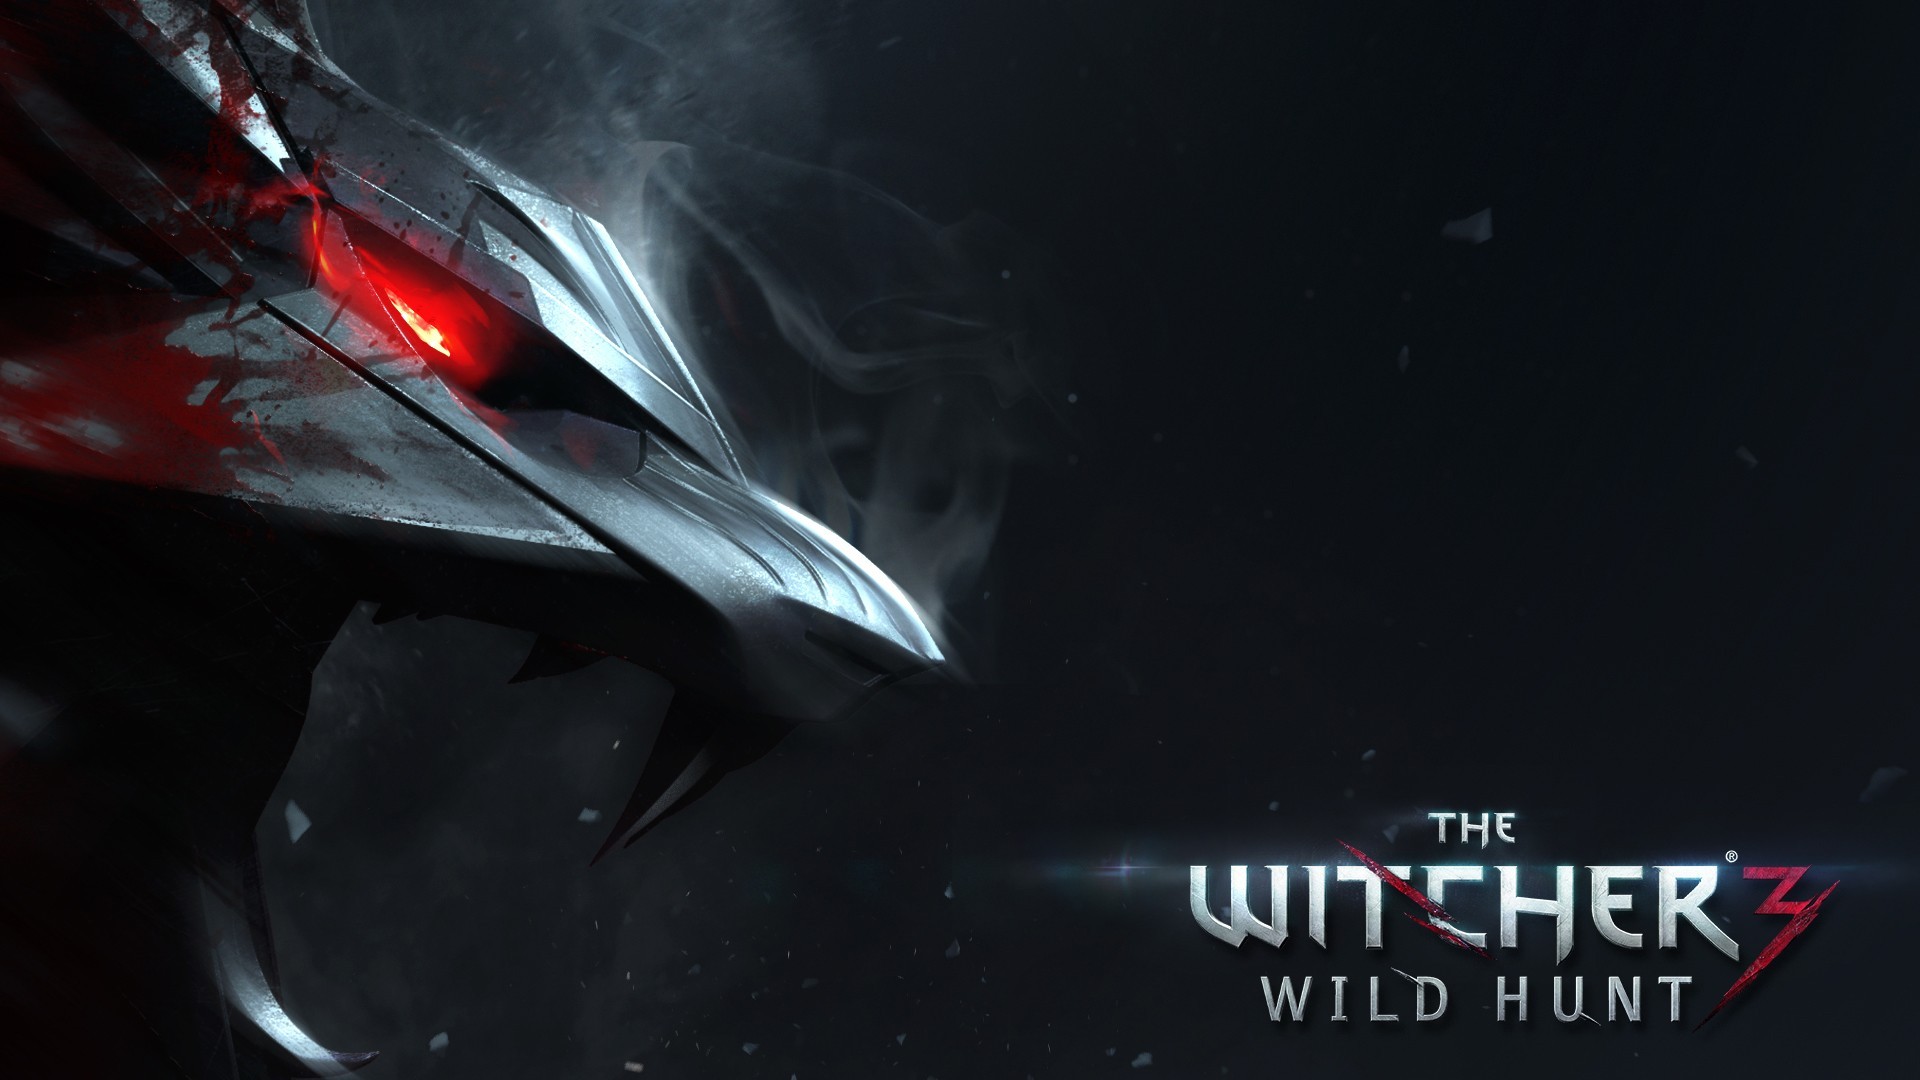 gamers, The Witcher 3: Wild Hunt Wallpaper